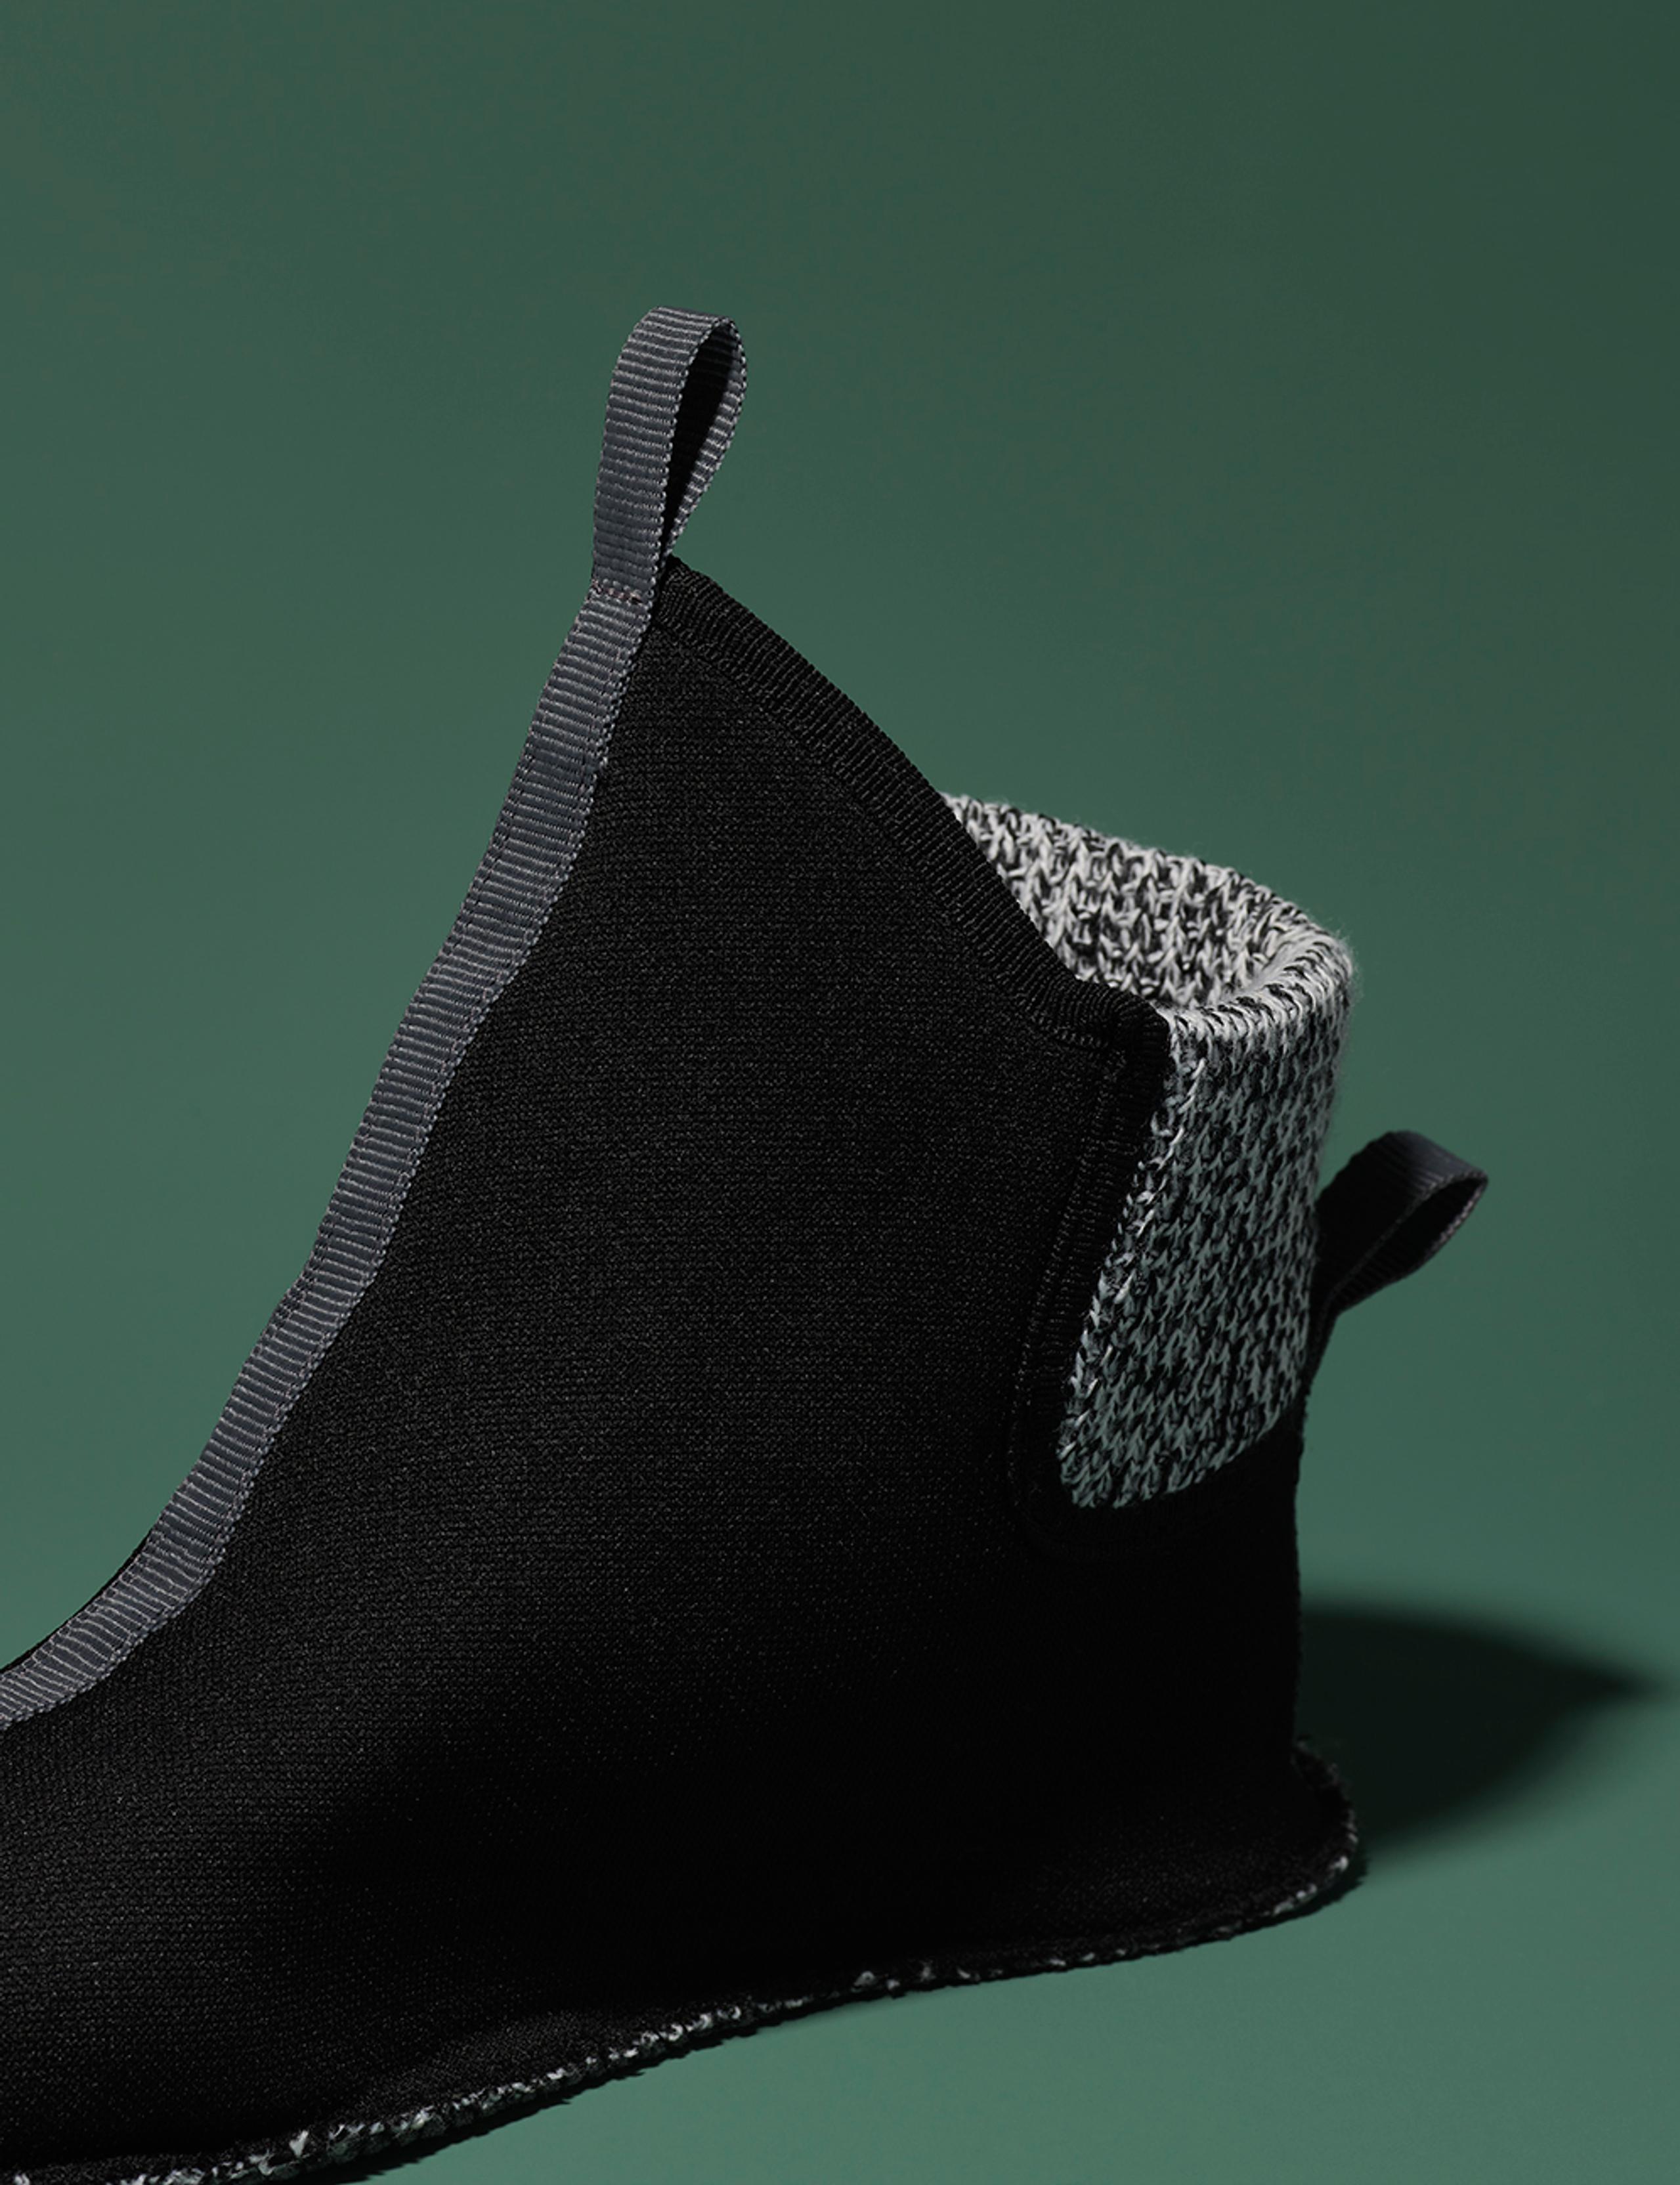 Removed sock bootie with neoprene outer shell